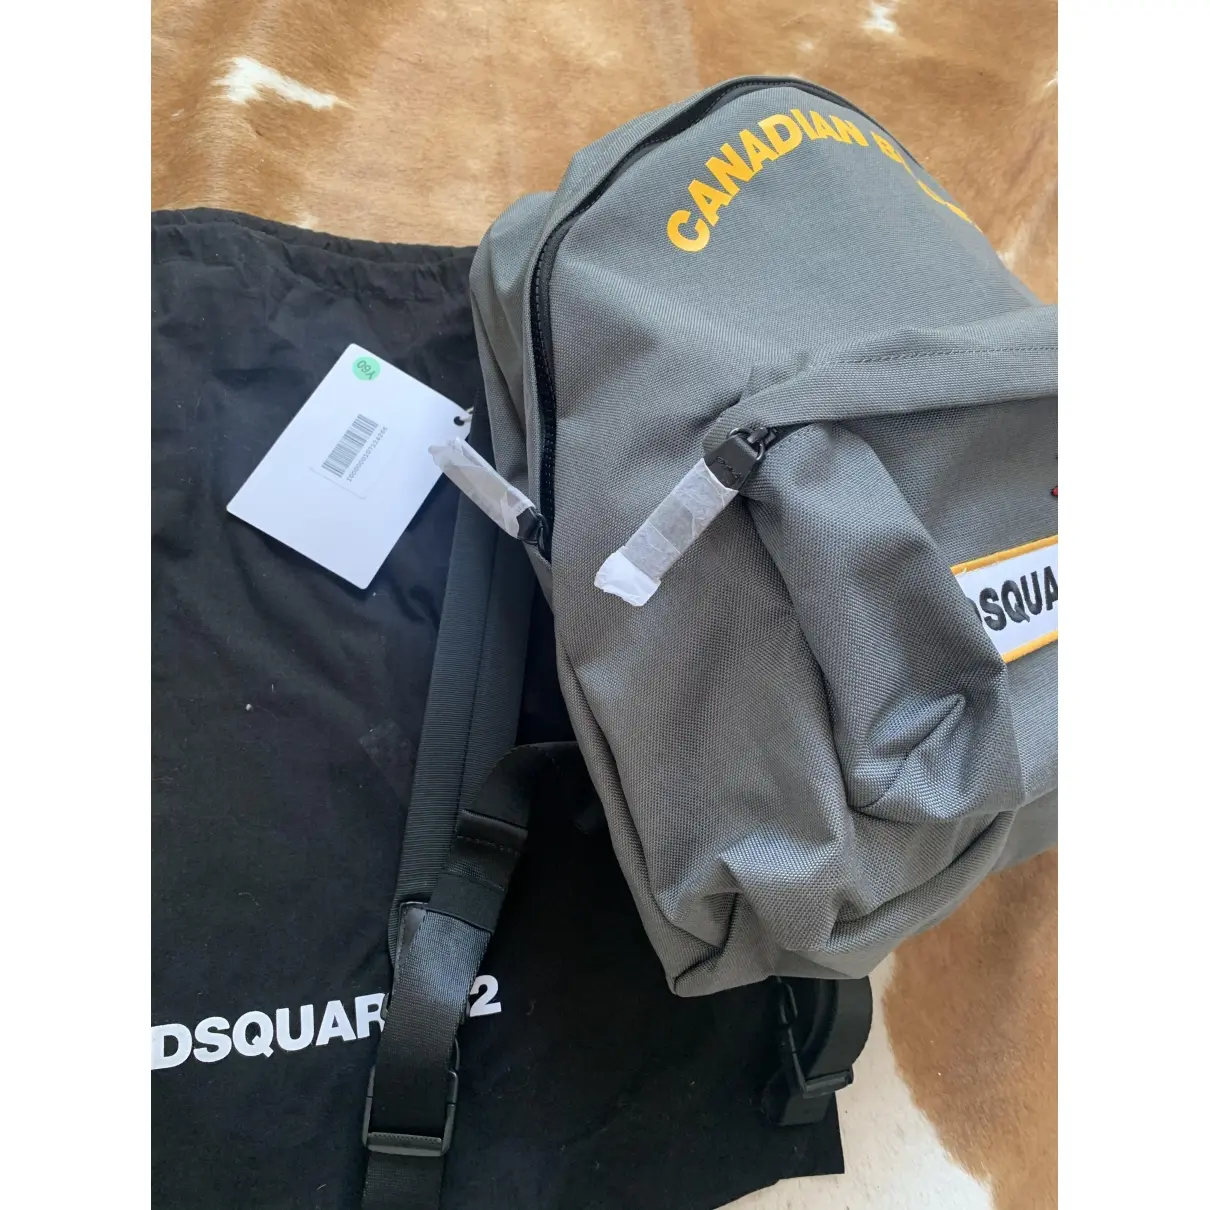 Buy Dsquared2 Cloth backpack online